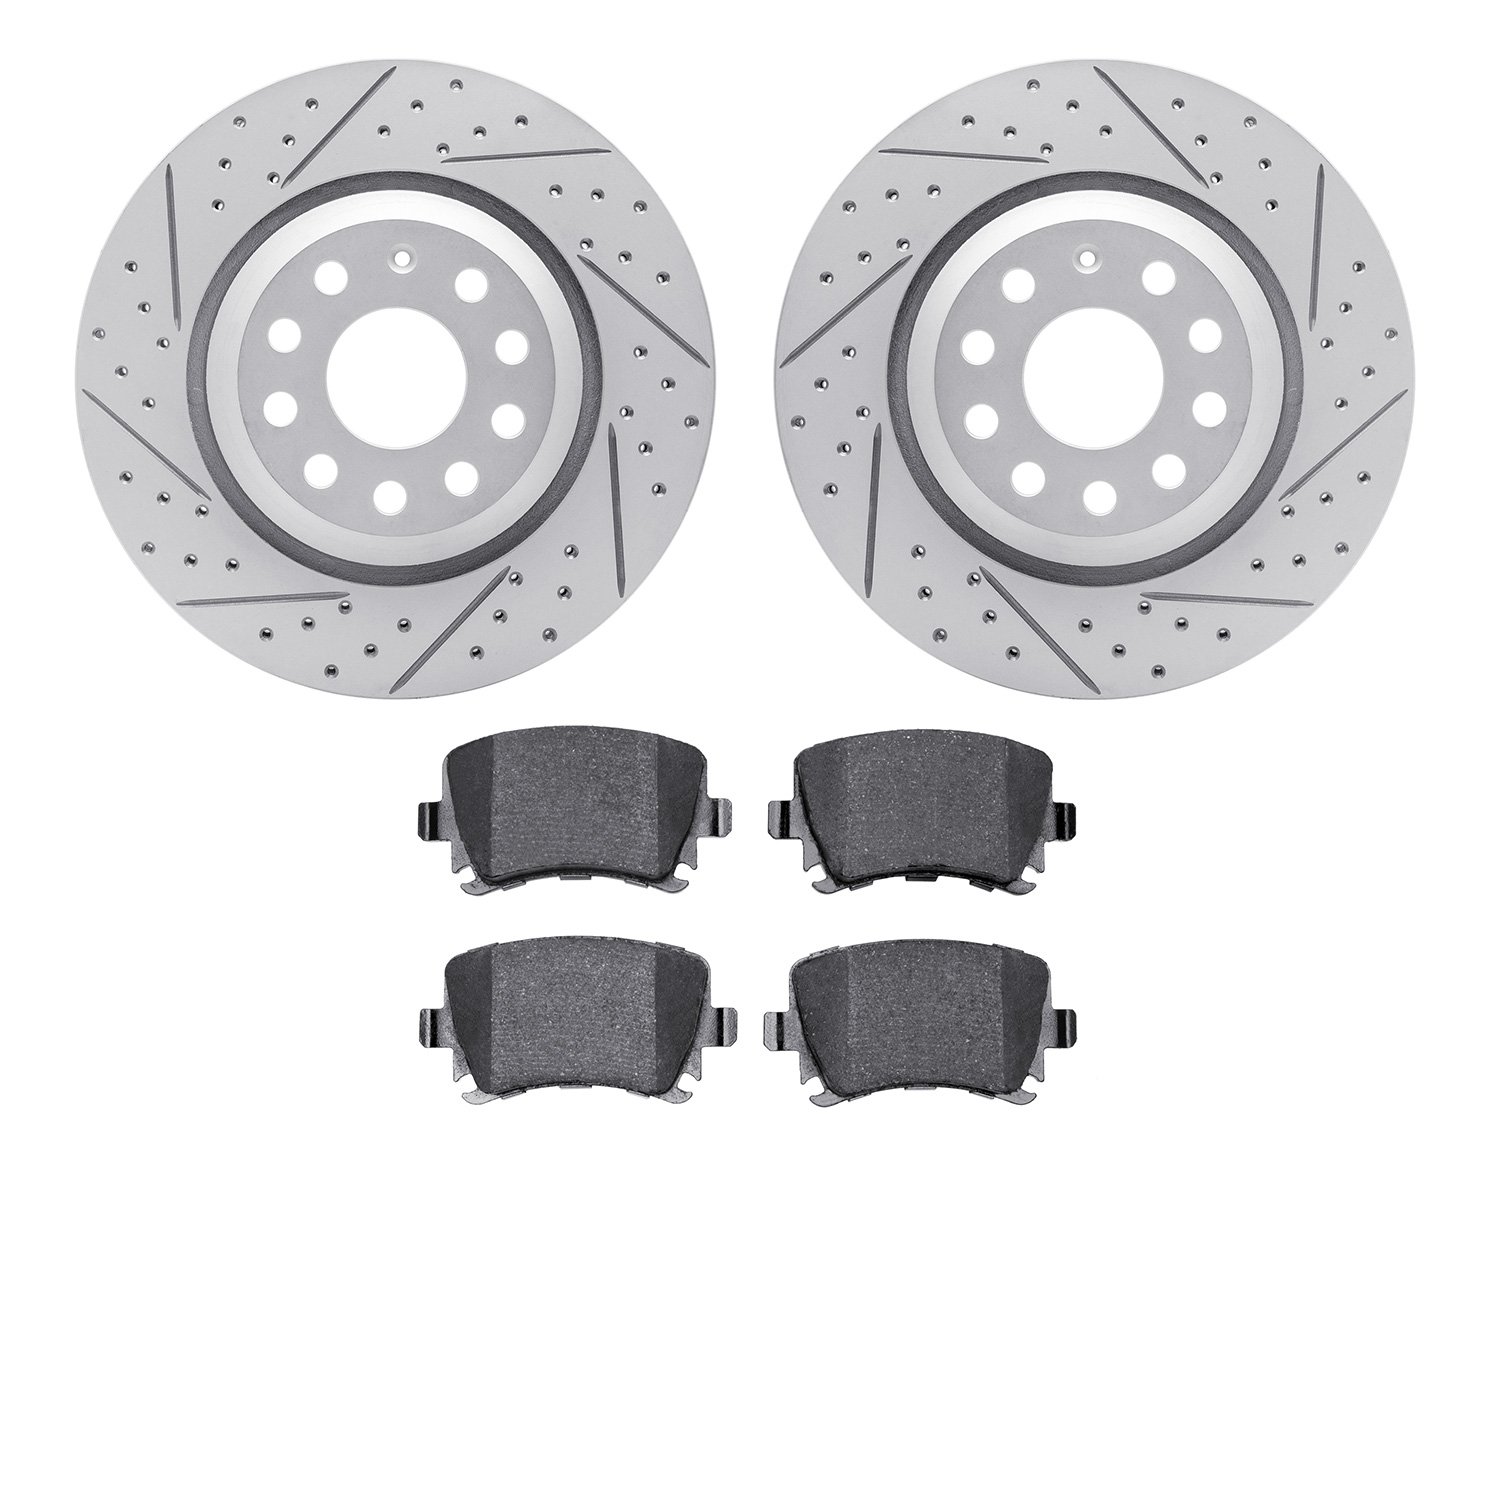 2502-74042 Geoperformance Drilled/Slotted Rotors w/5000 Advanced Brake Pads Kit, 2006-2021 Audi/Volkswagen, Position: Rear